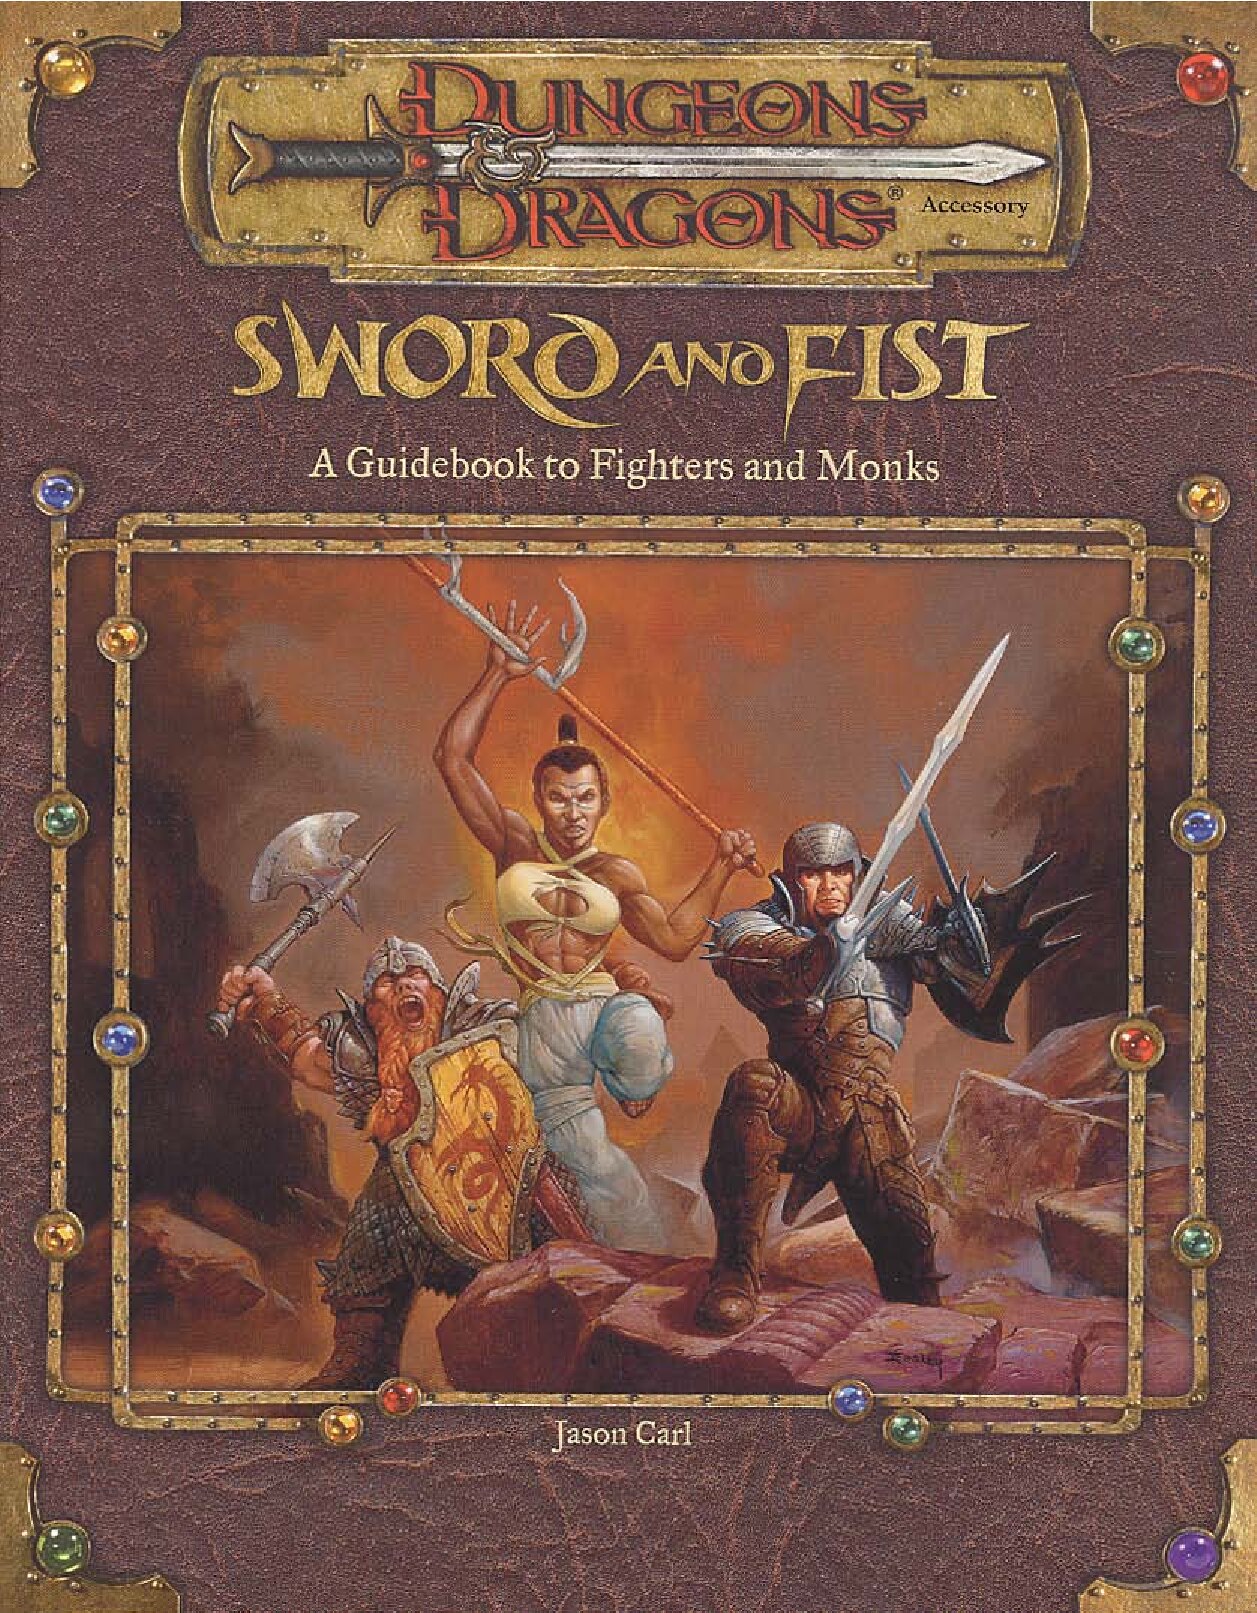 Sword and Fist, A Guidebook to Monks and Fighters